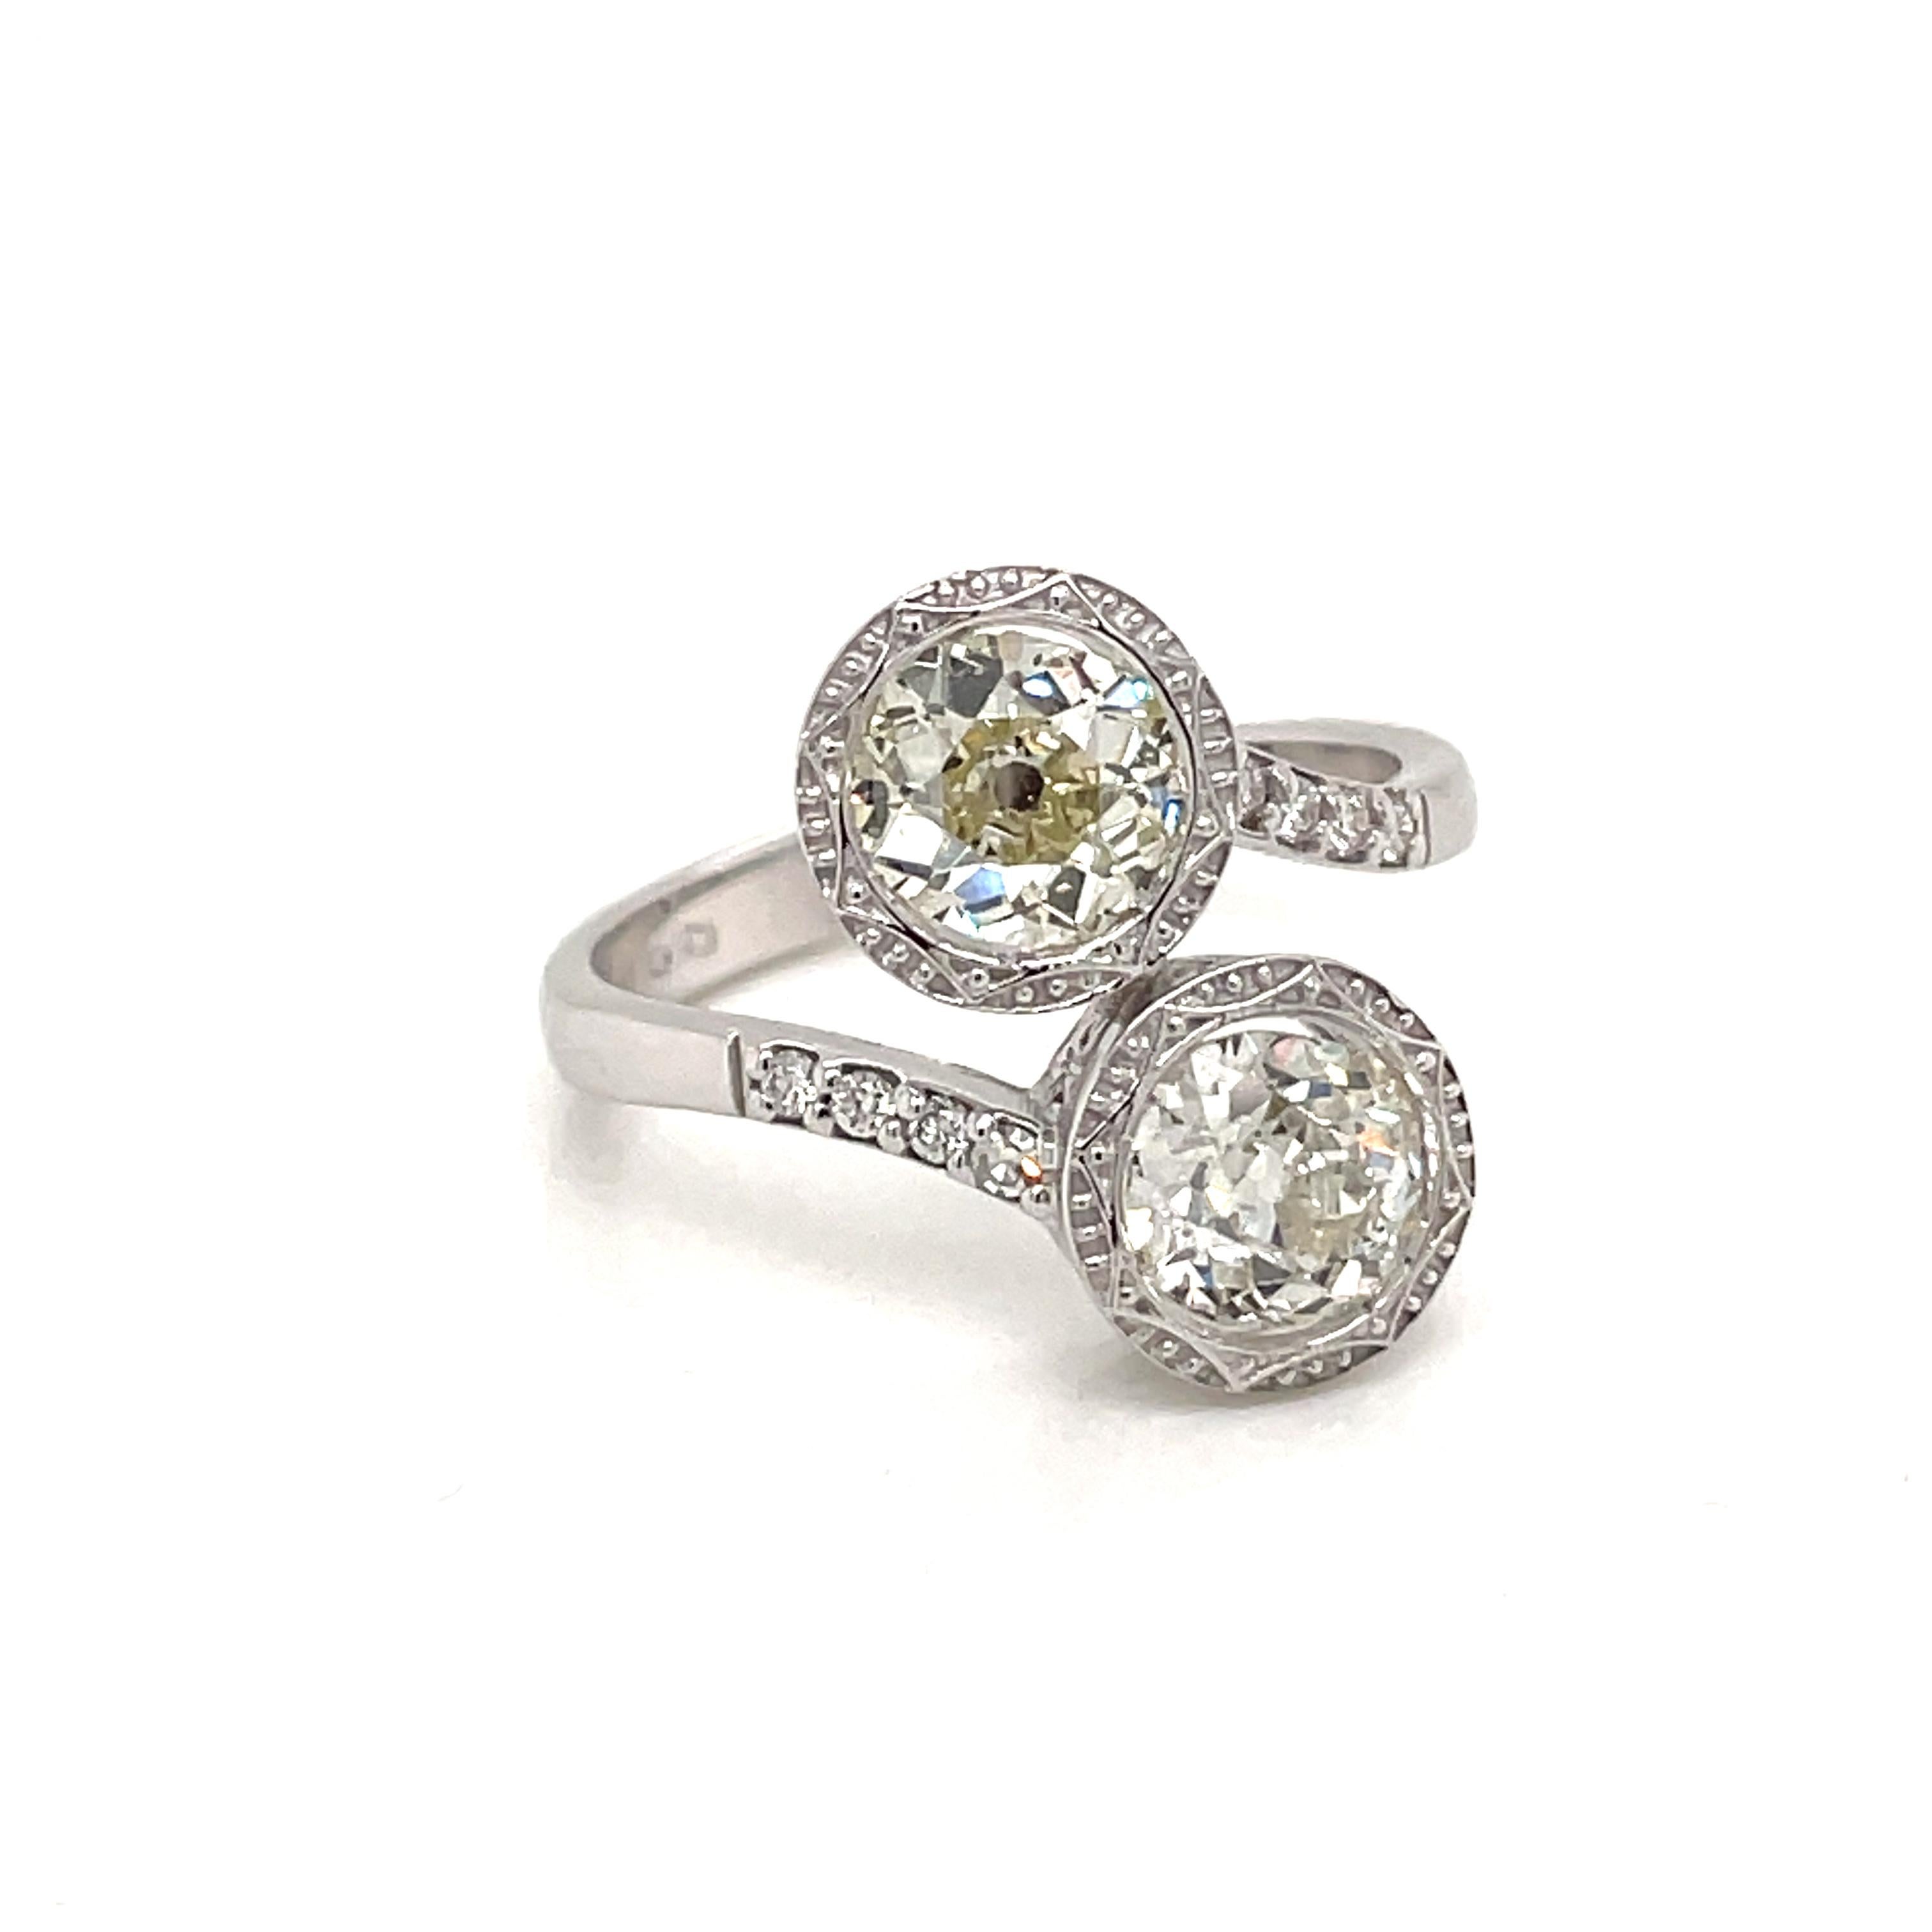 Beautiful Diamond Bypass Ring
An 18K white gold bypass ring, set with two old mine cut diamonds, weights are 1.90 cts for the main diamonds and .10 cts.
Mede in Italy, circa 1980s

CONDITION: Pre-owned - Excellent 
METAL: 18k gold
GEM STONE: Diamond